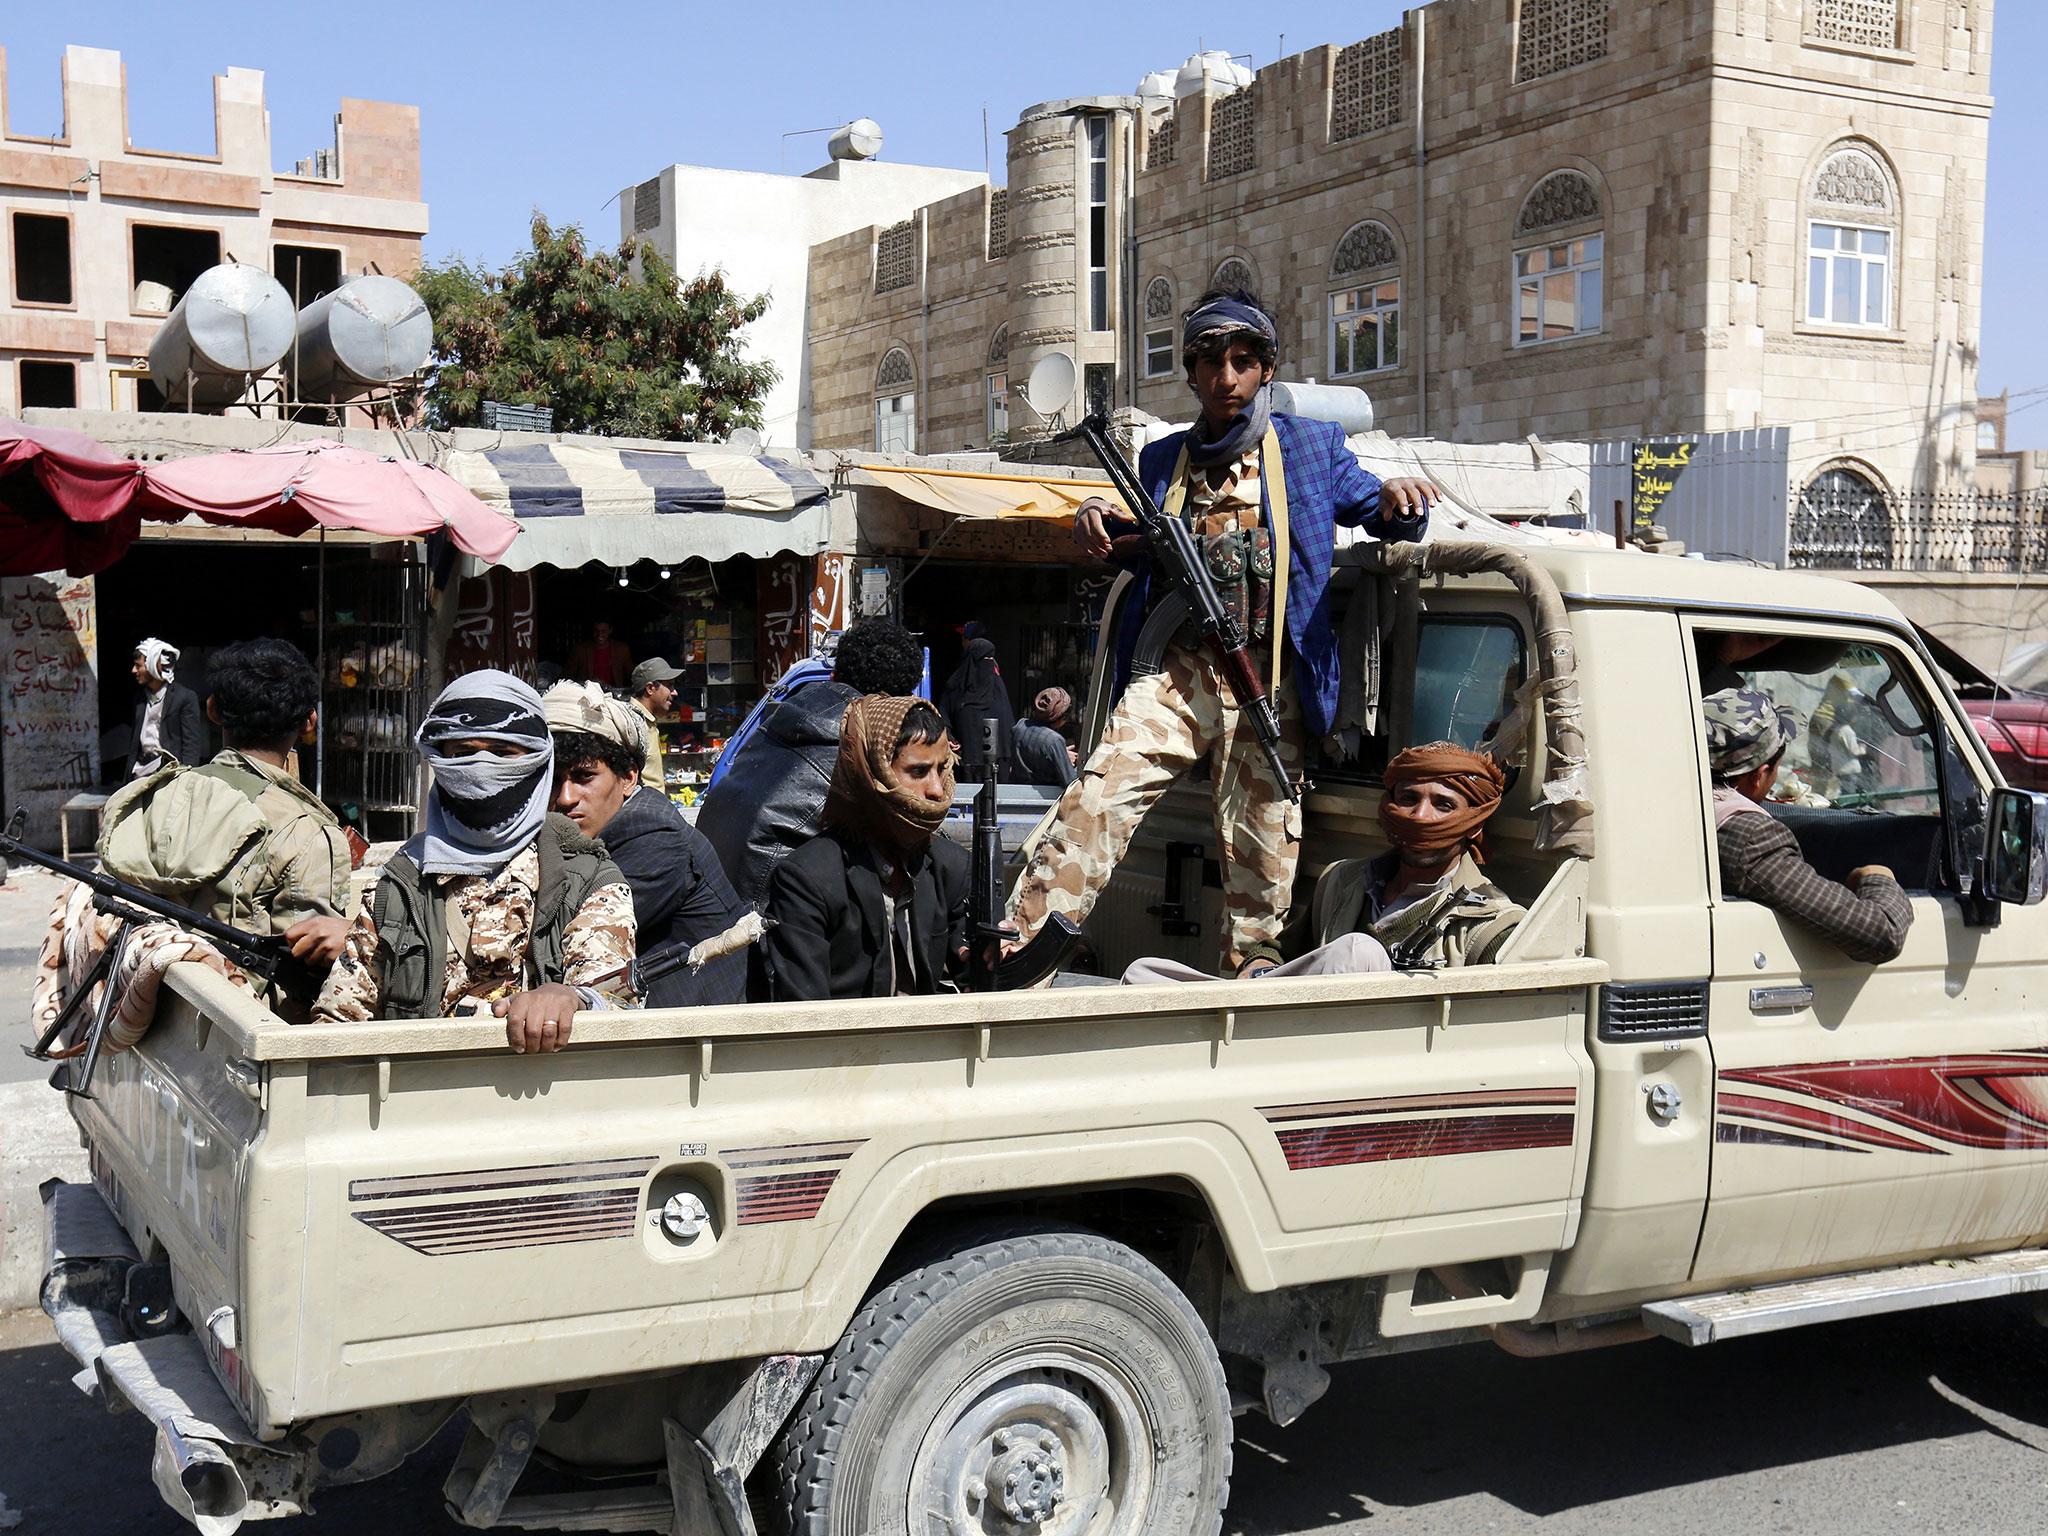 Yemen's rebel alliance continued to fall apart as fighting took place between the Houthis and their onetime allies, the forces loyal to the country's former President